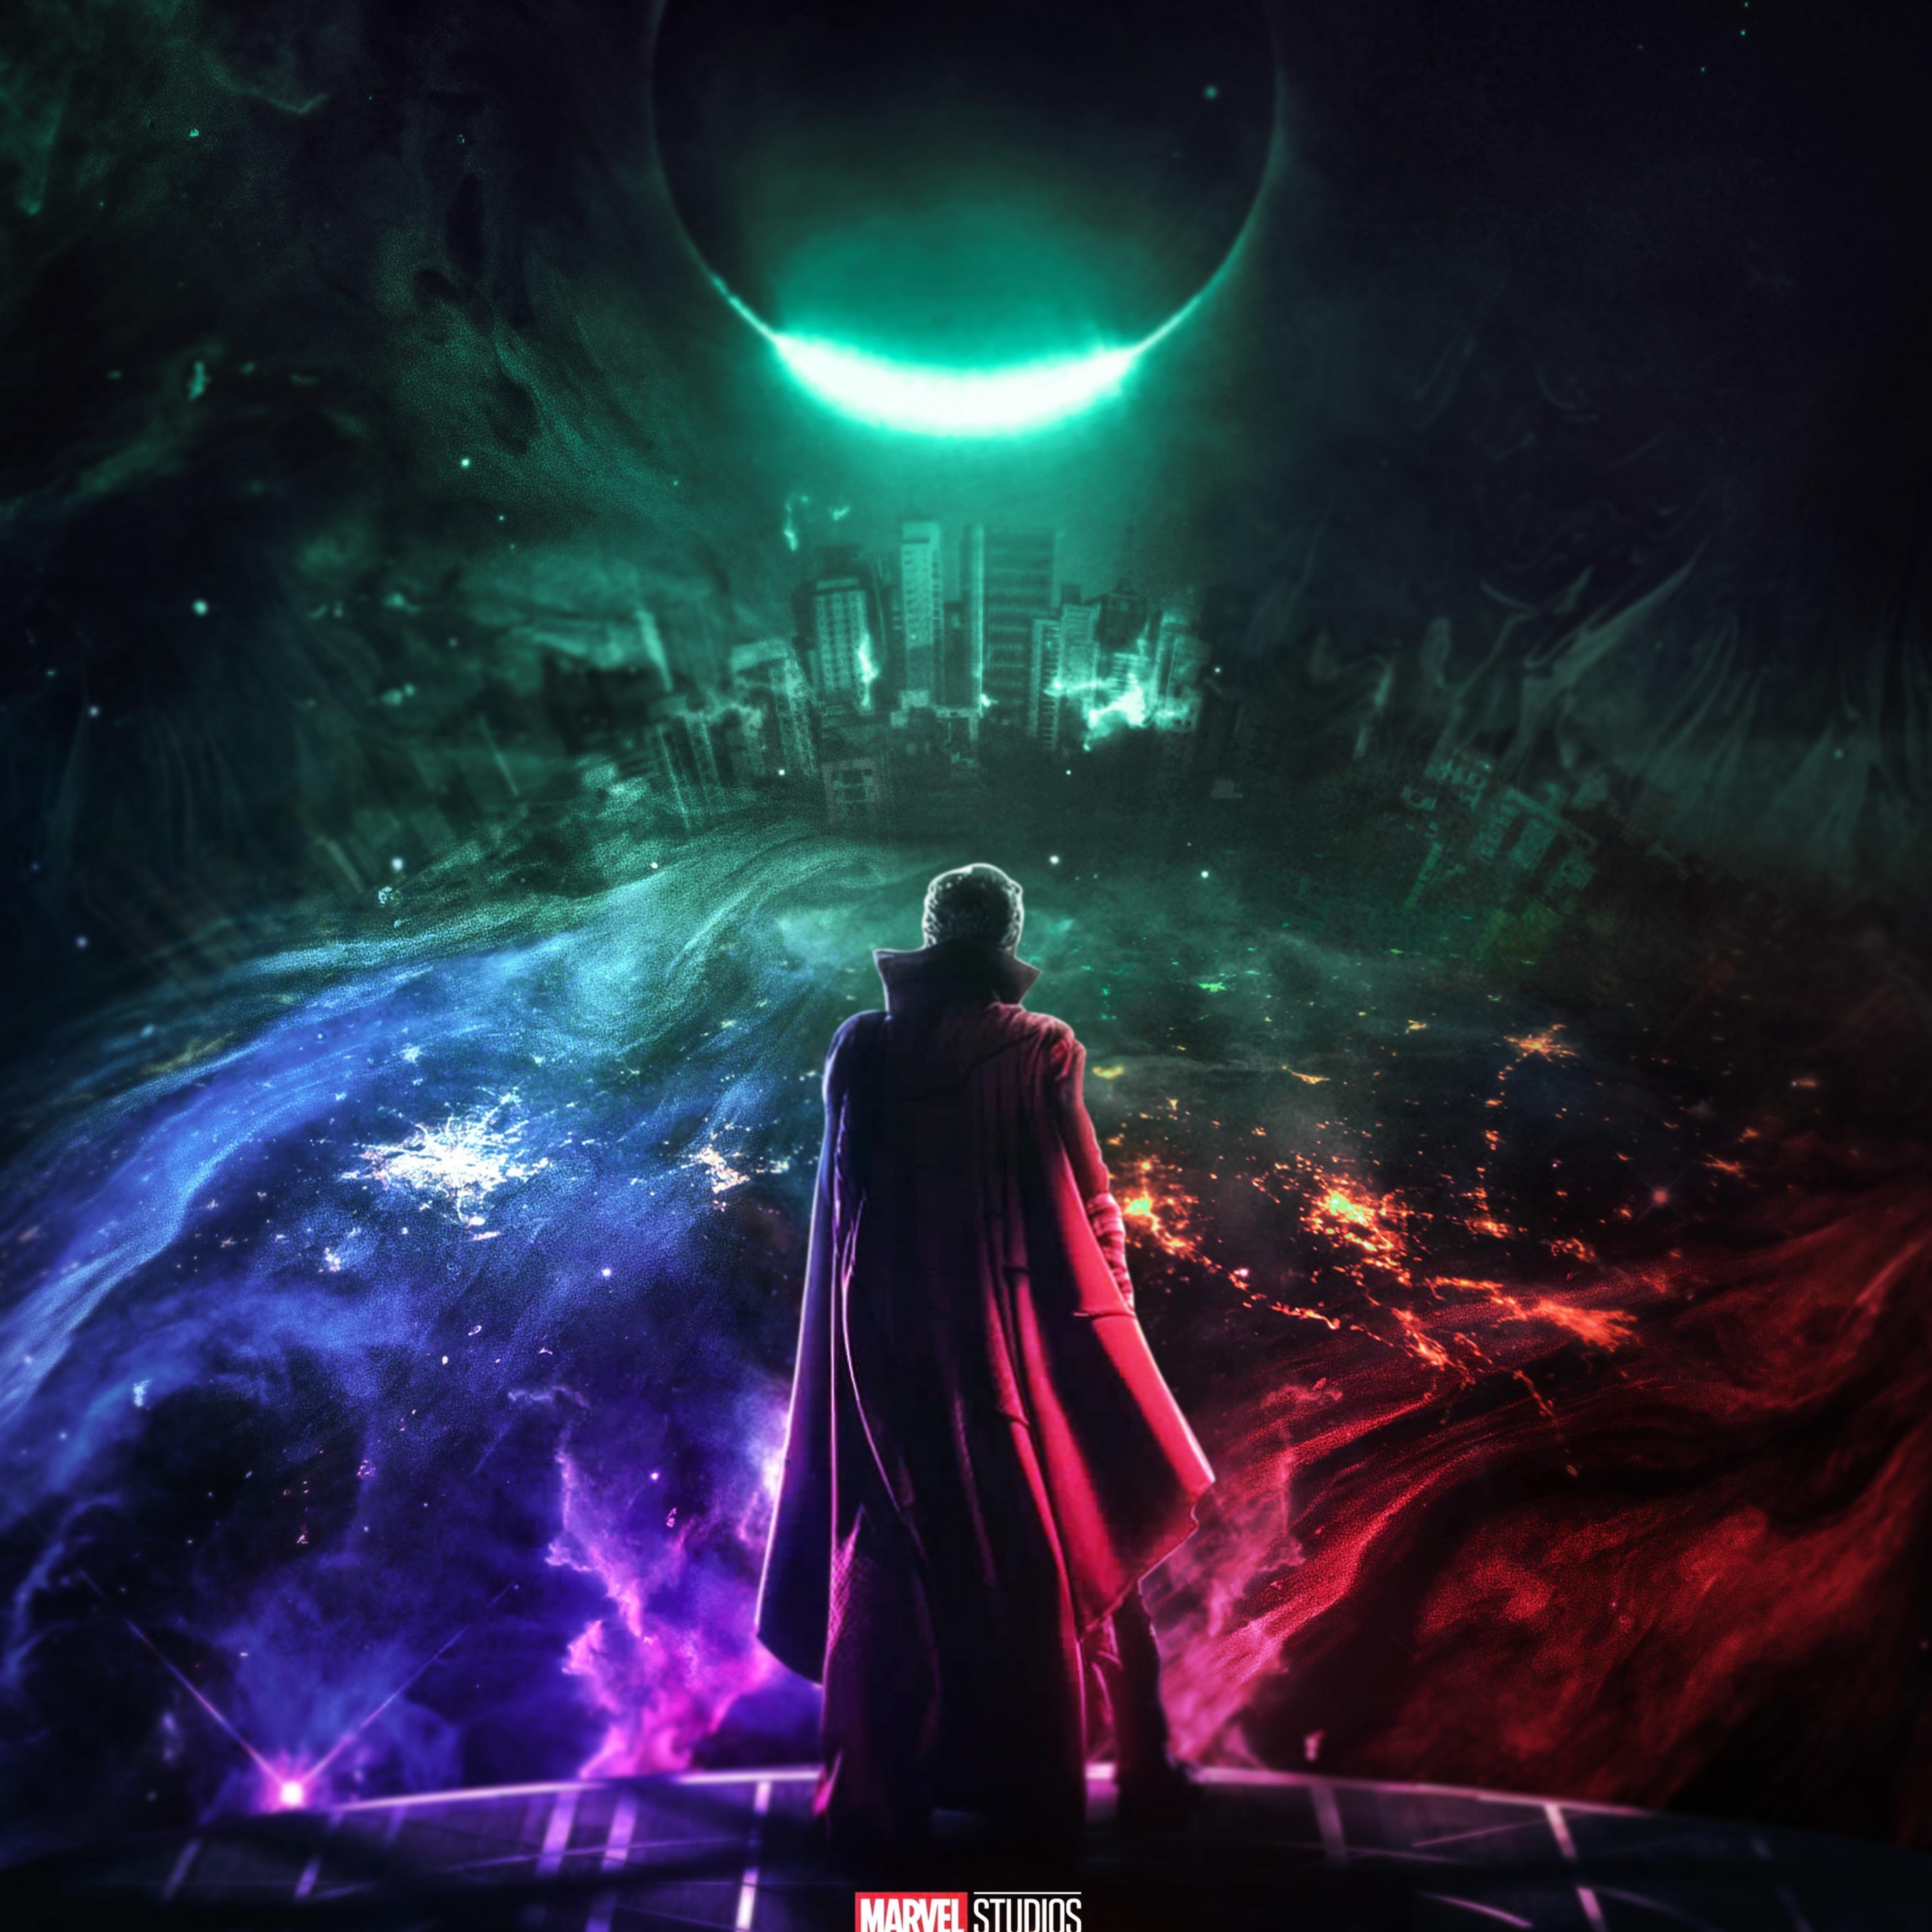 Doctor Strange in the Multiverse of Madness Wallpaper 4K, 2022 Movies, Marvel Comics, Movies